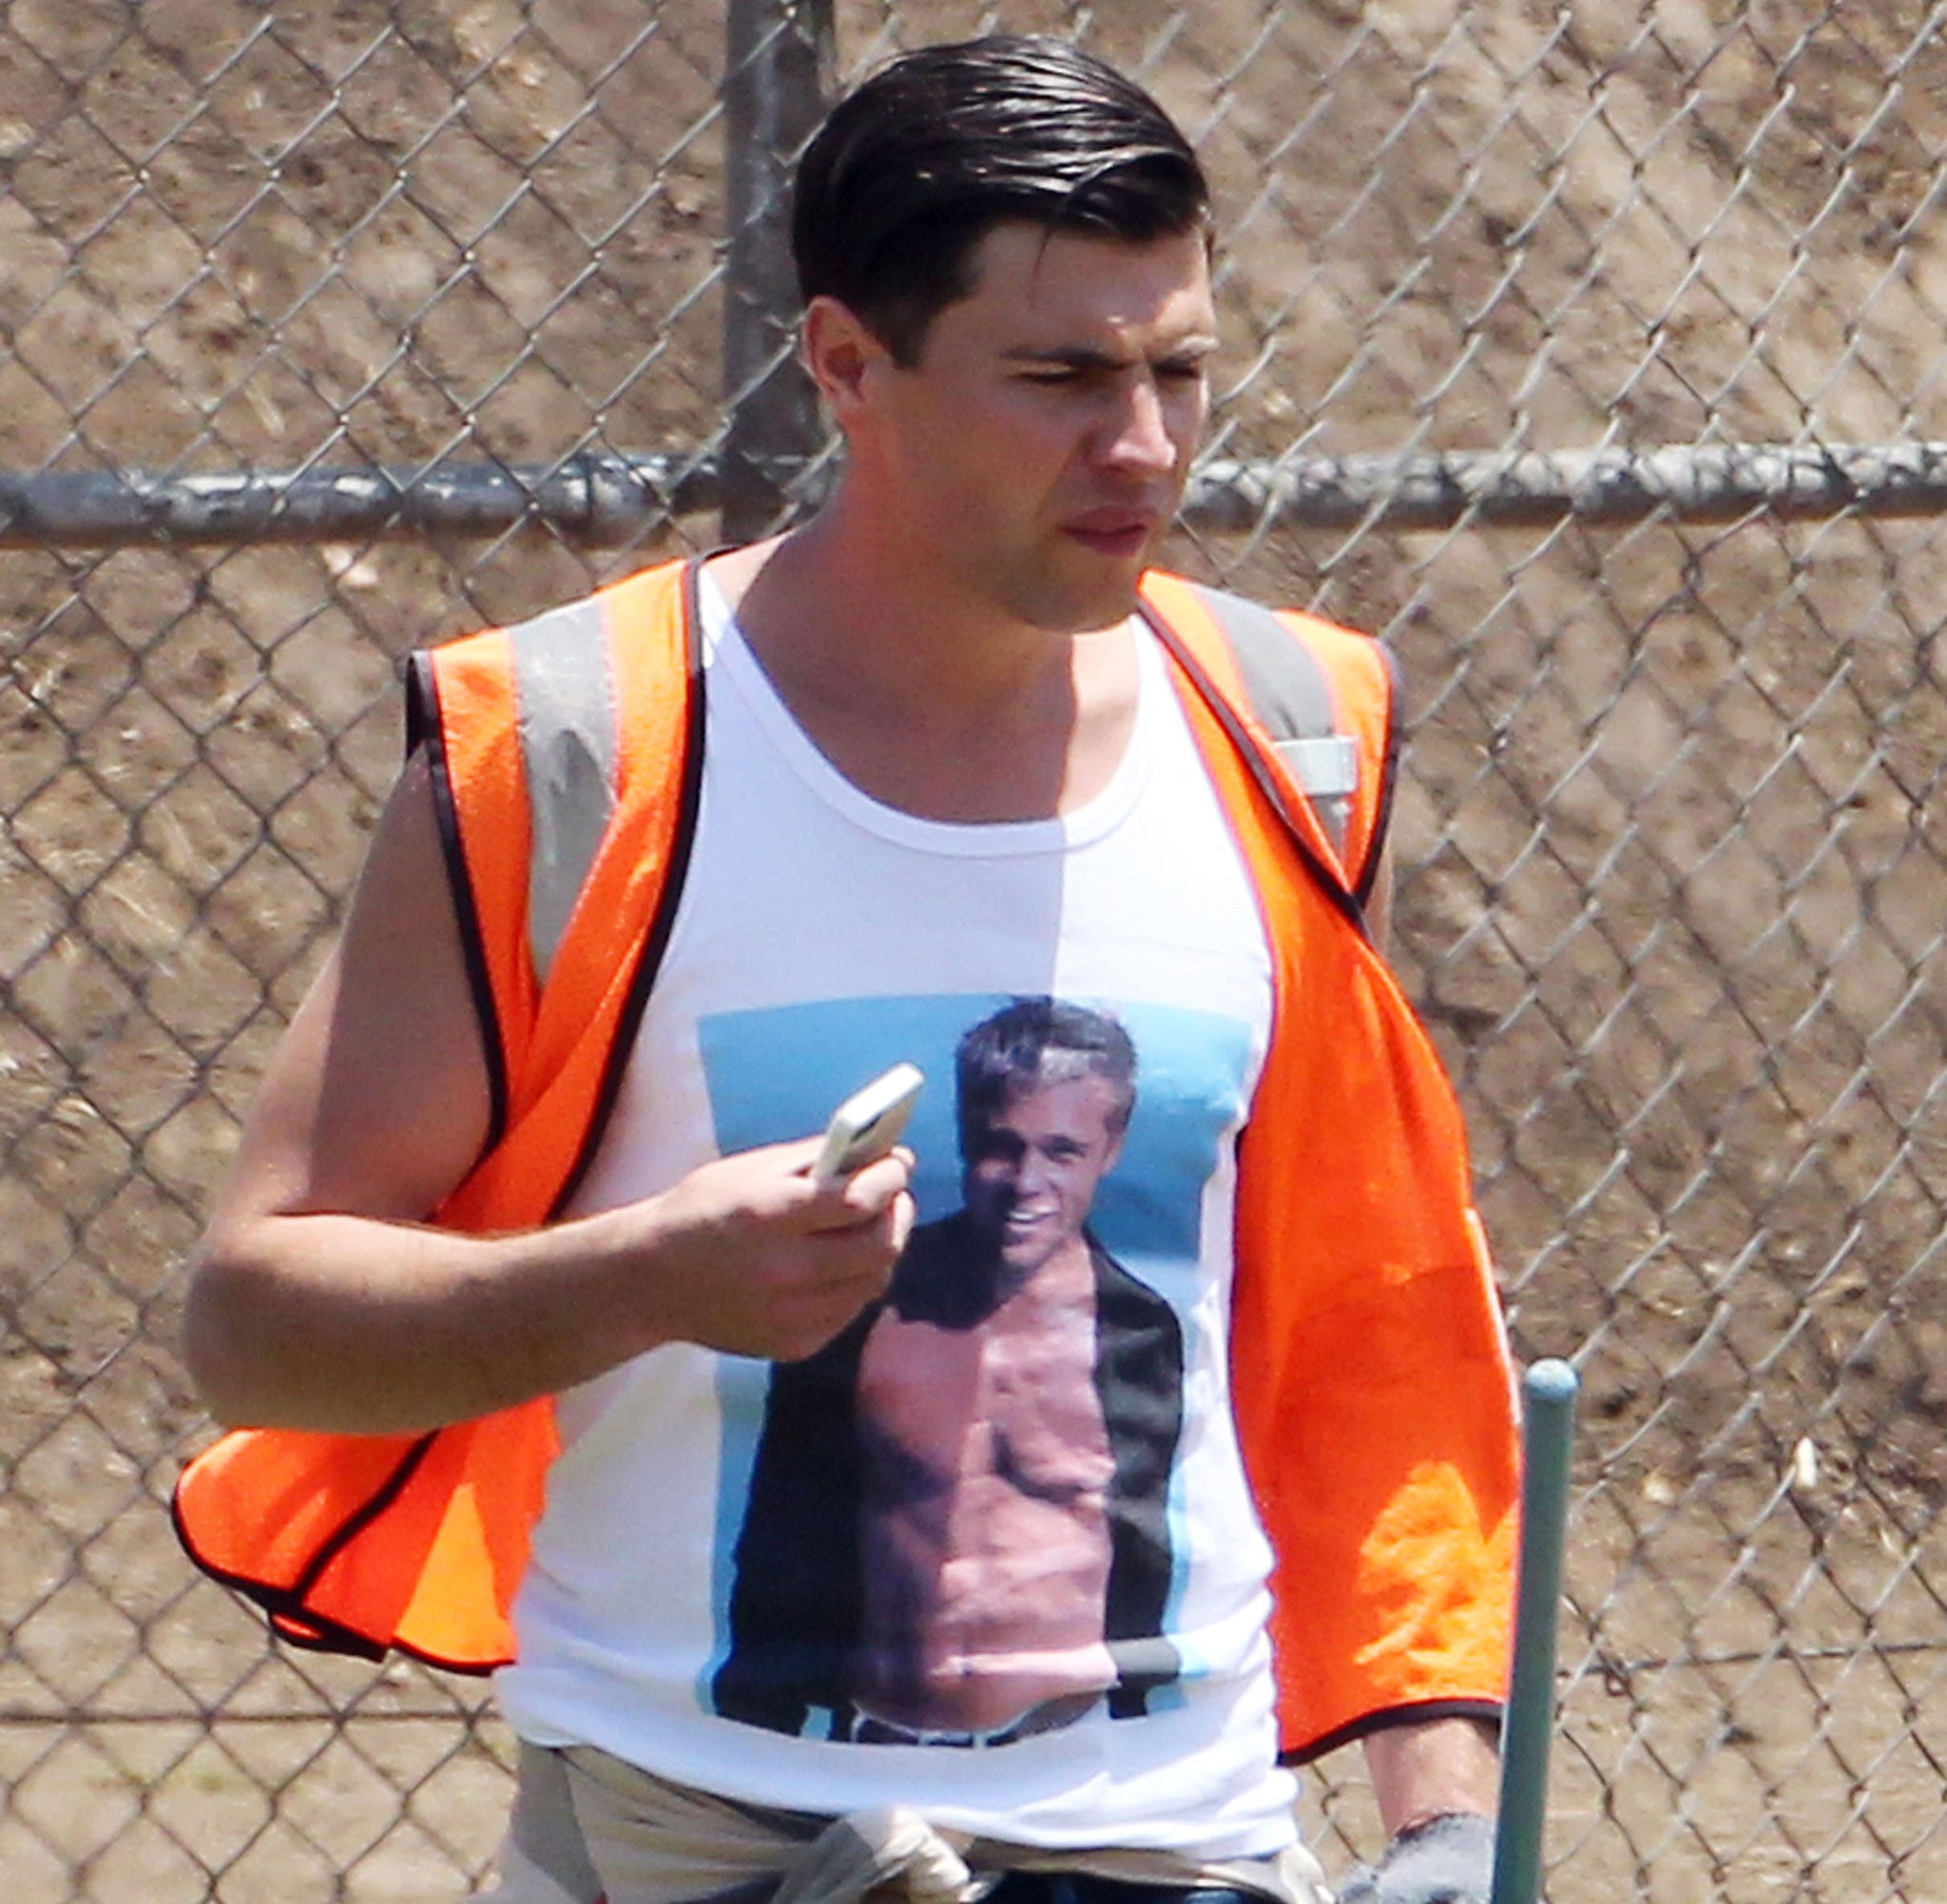 Vitalii Sediuk performs community service at Griffith Park Recreation park on 11 June, 2014, in Los Angeles, California